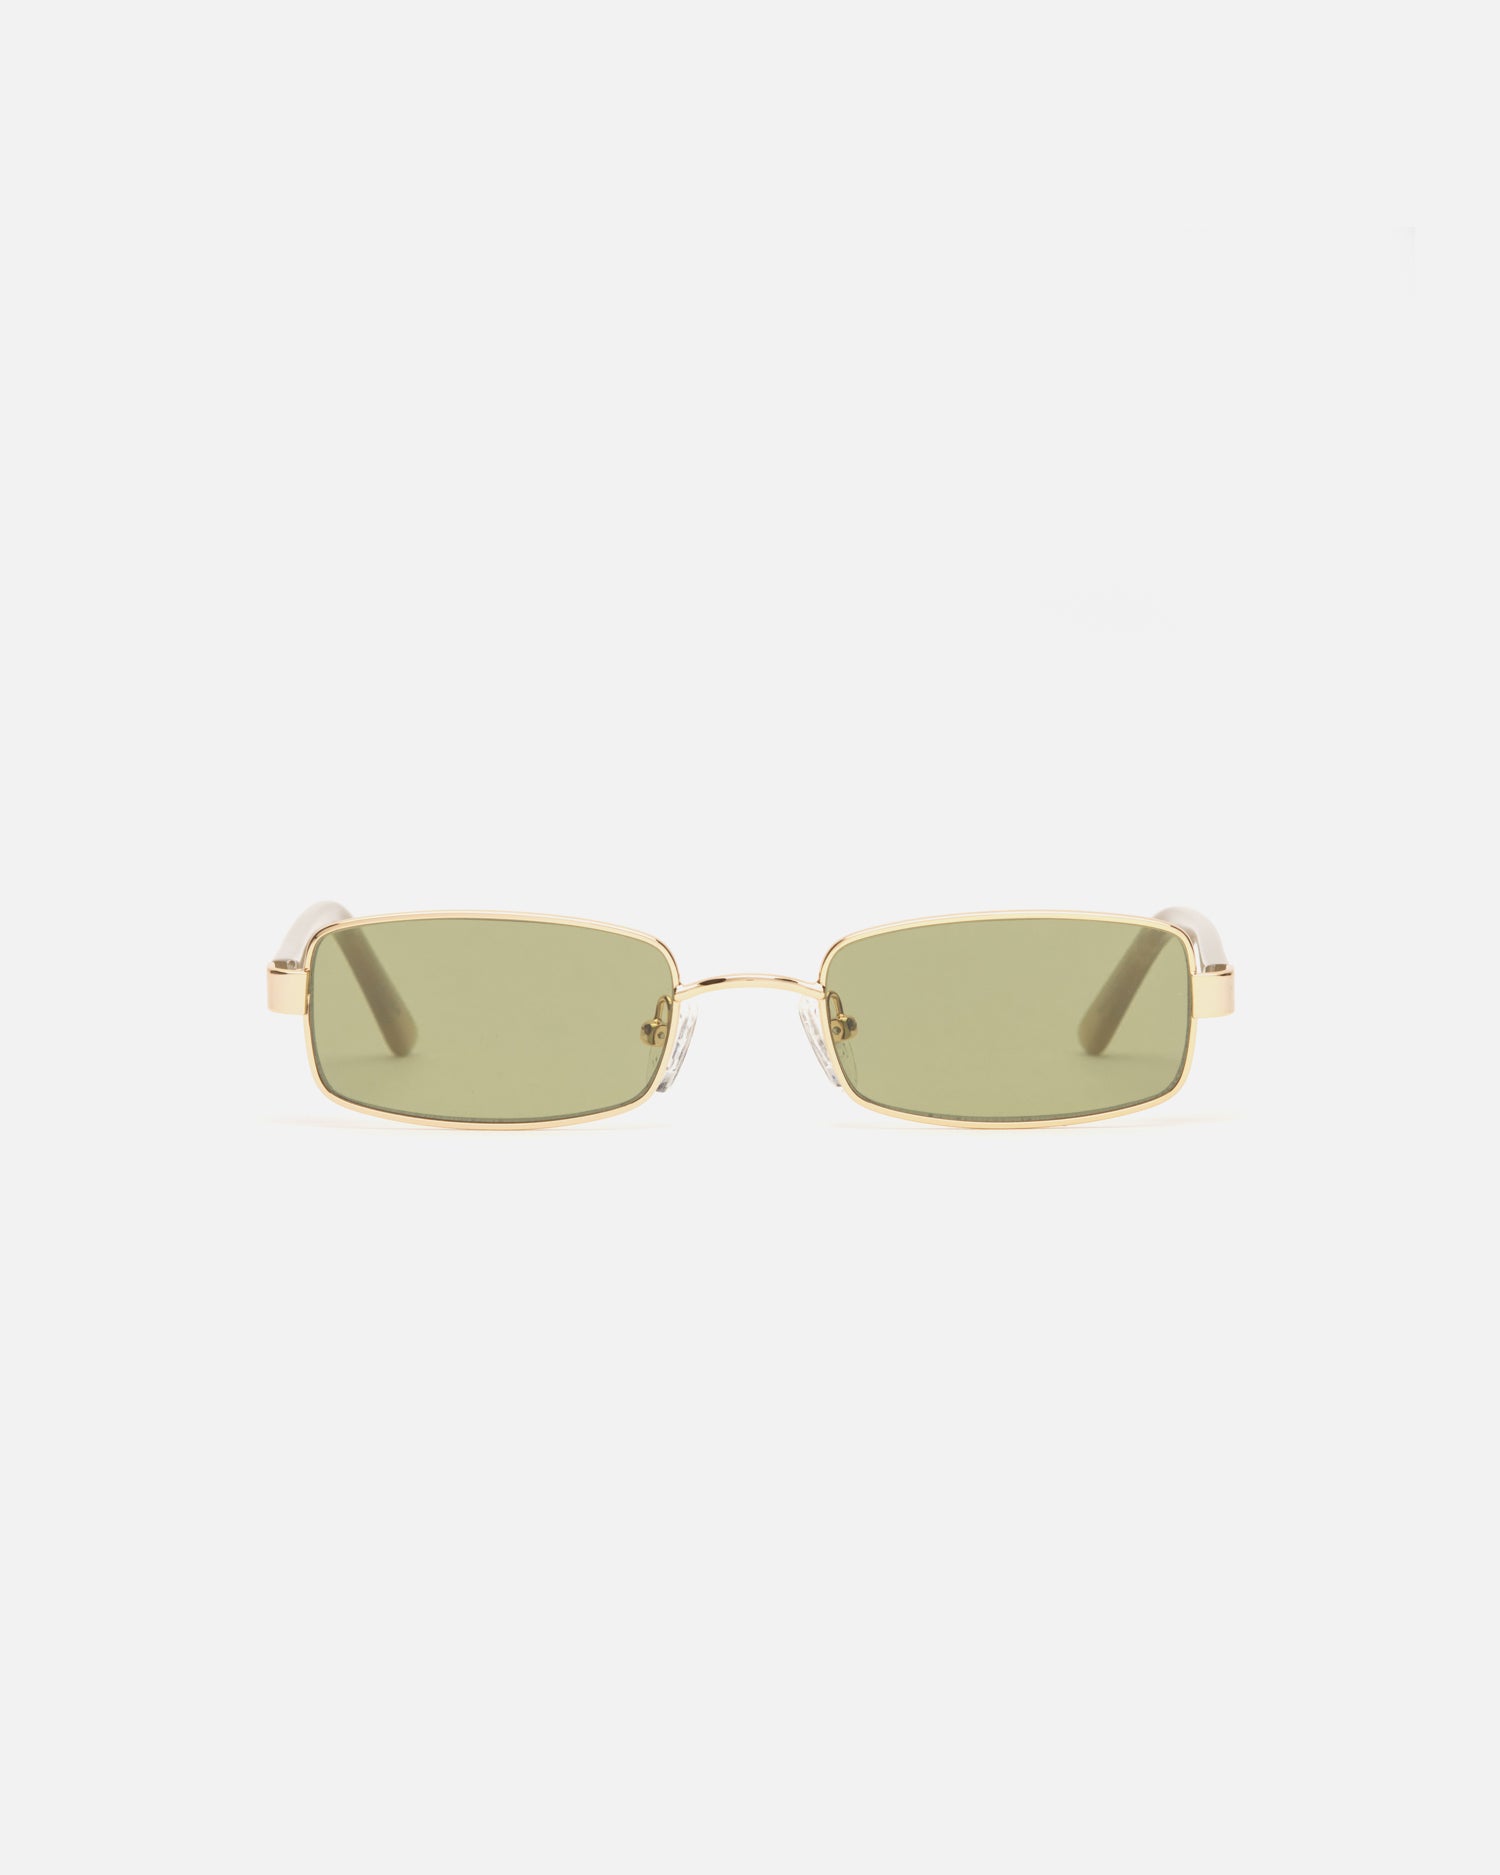 Lu Goldie Nina Gold Wire Frame Rectangle Sunglasses in Leaf Green, front image